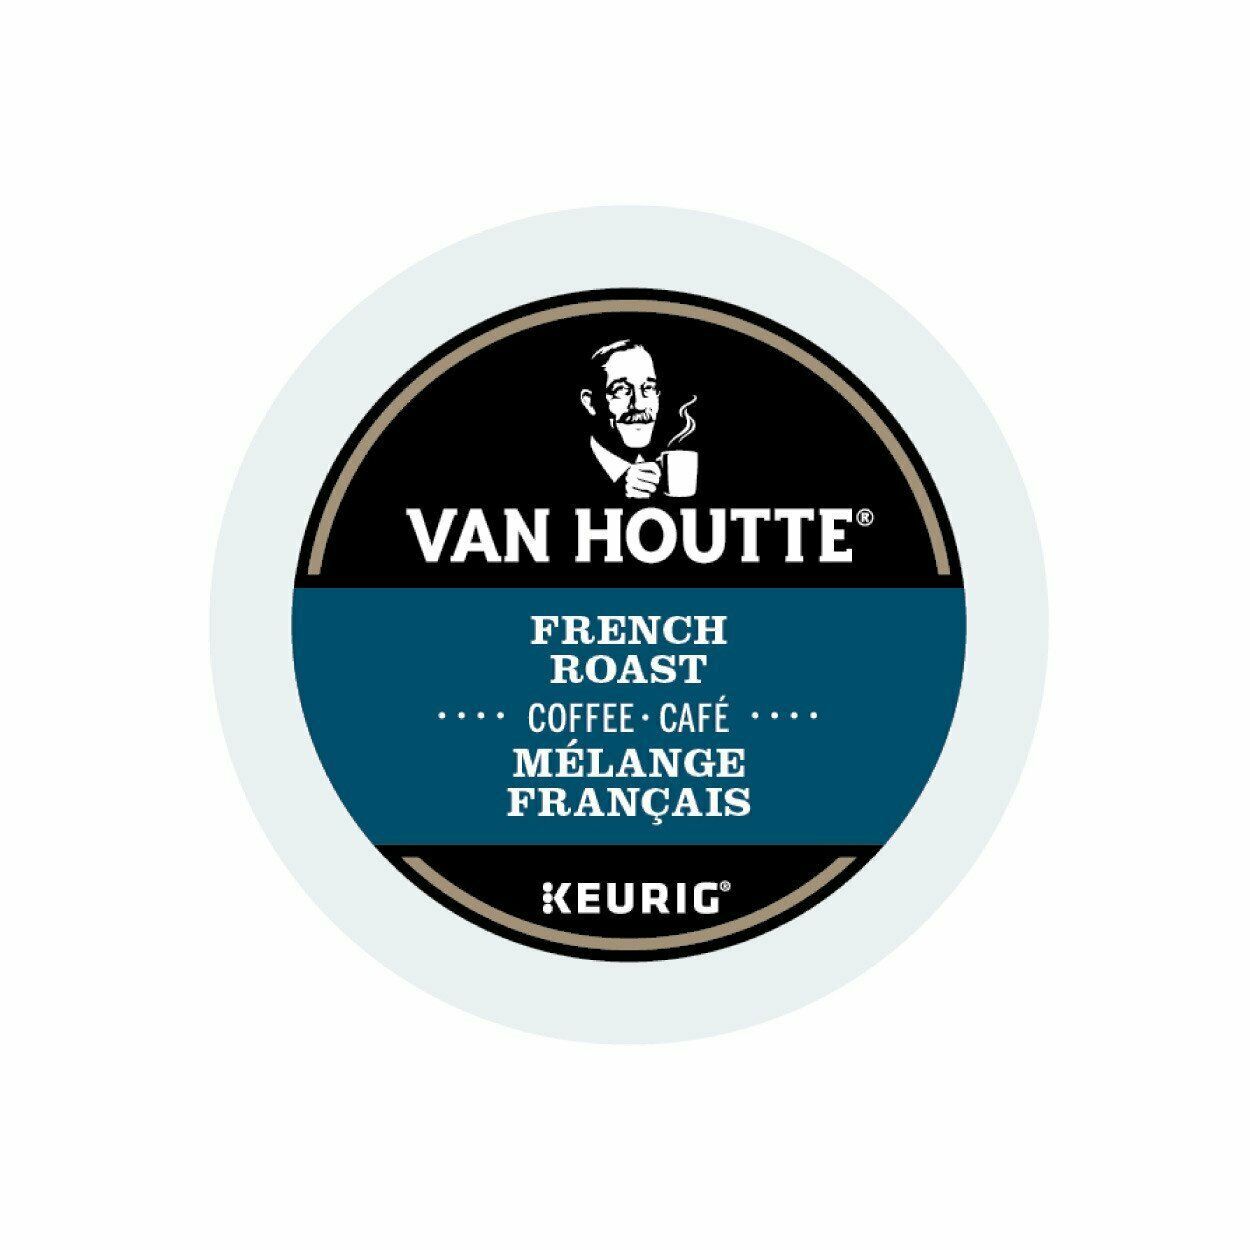 Van Houtte French Roast Coffee 24 to 144 Keurig K cups Pick Any Size FREE SHIP - $31.98 - $123.88